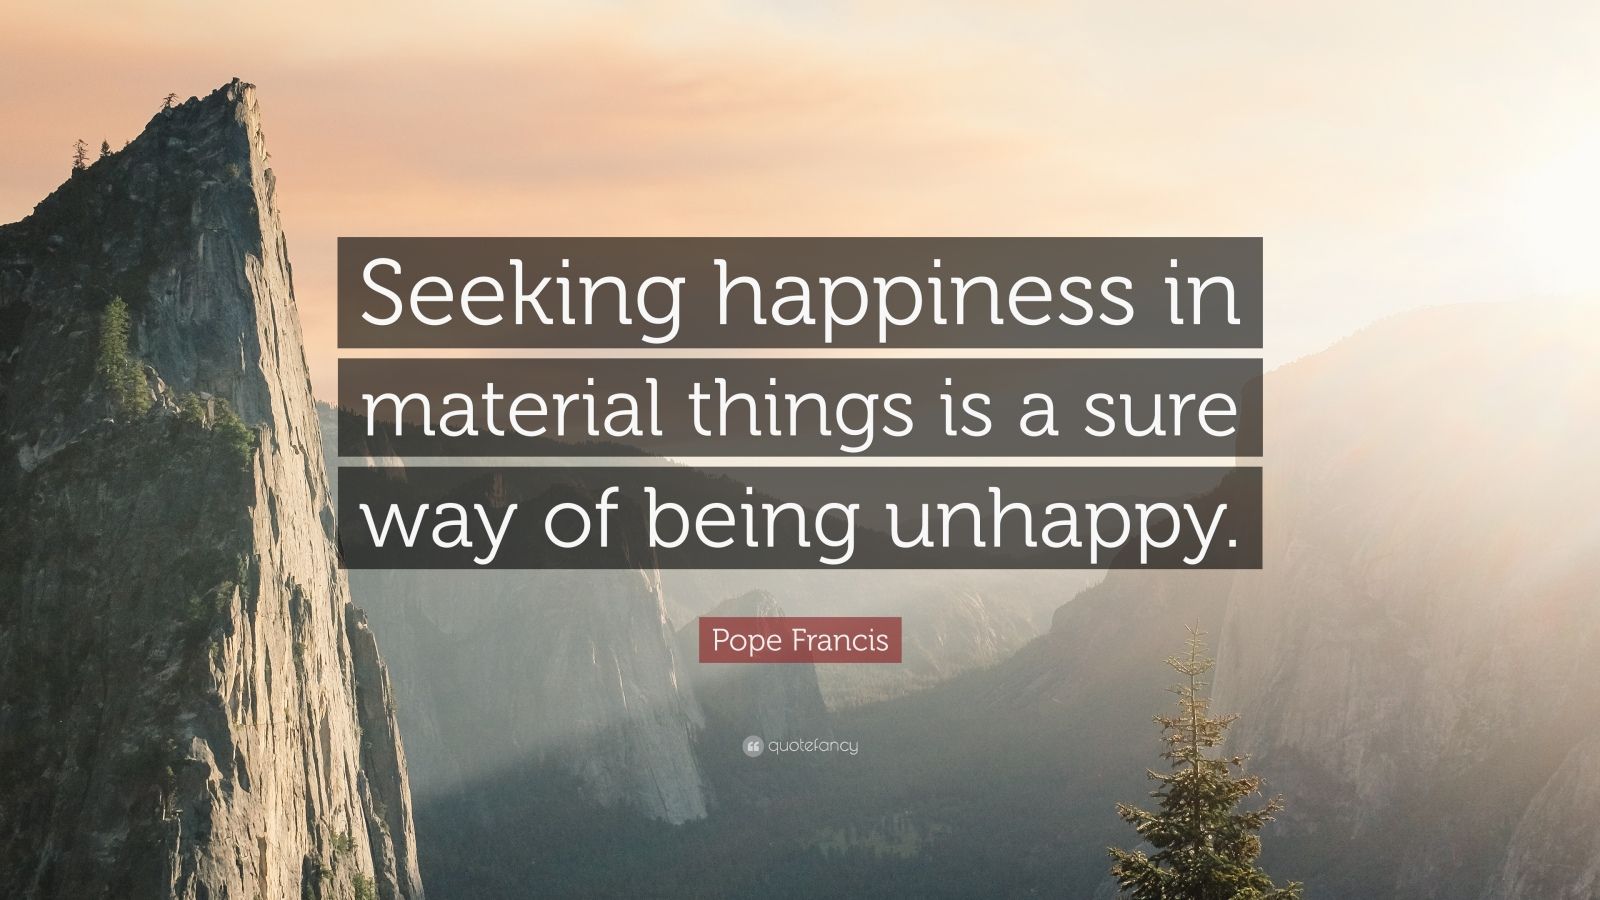 Pope Francis Quote: “Seeking happiness in material things is a sure way ...